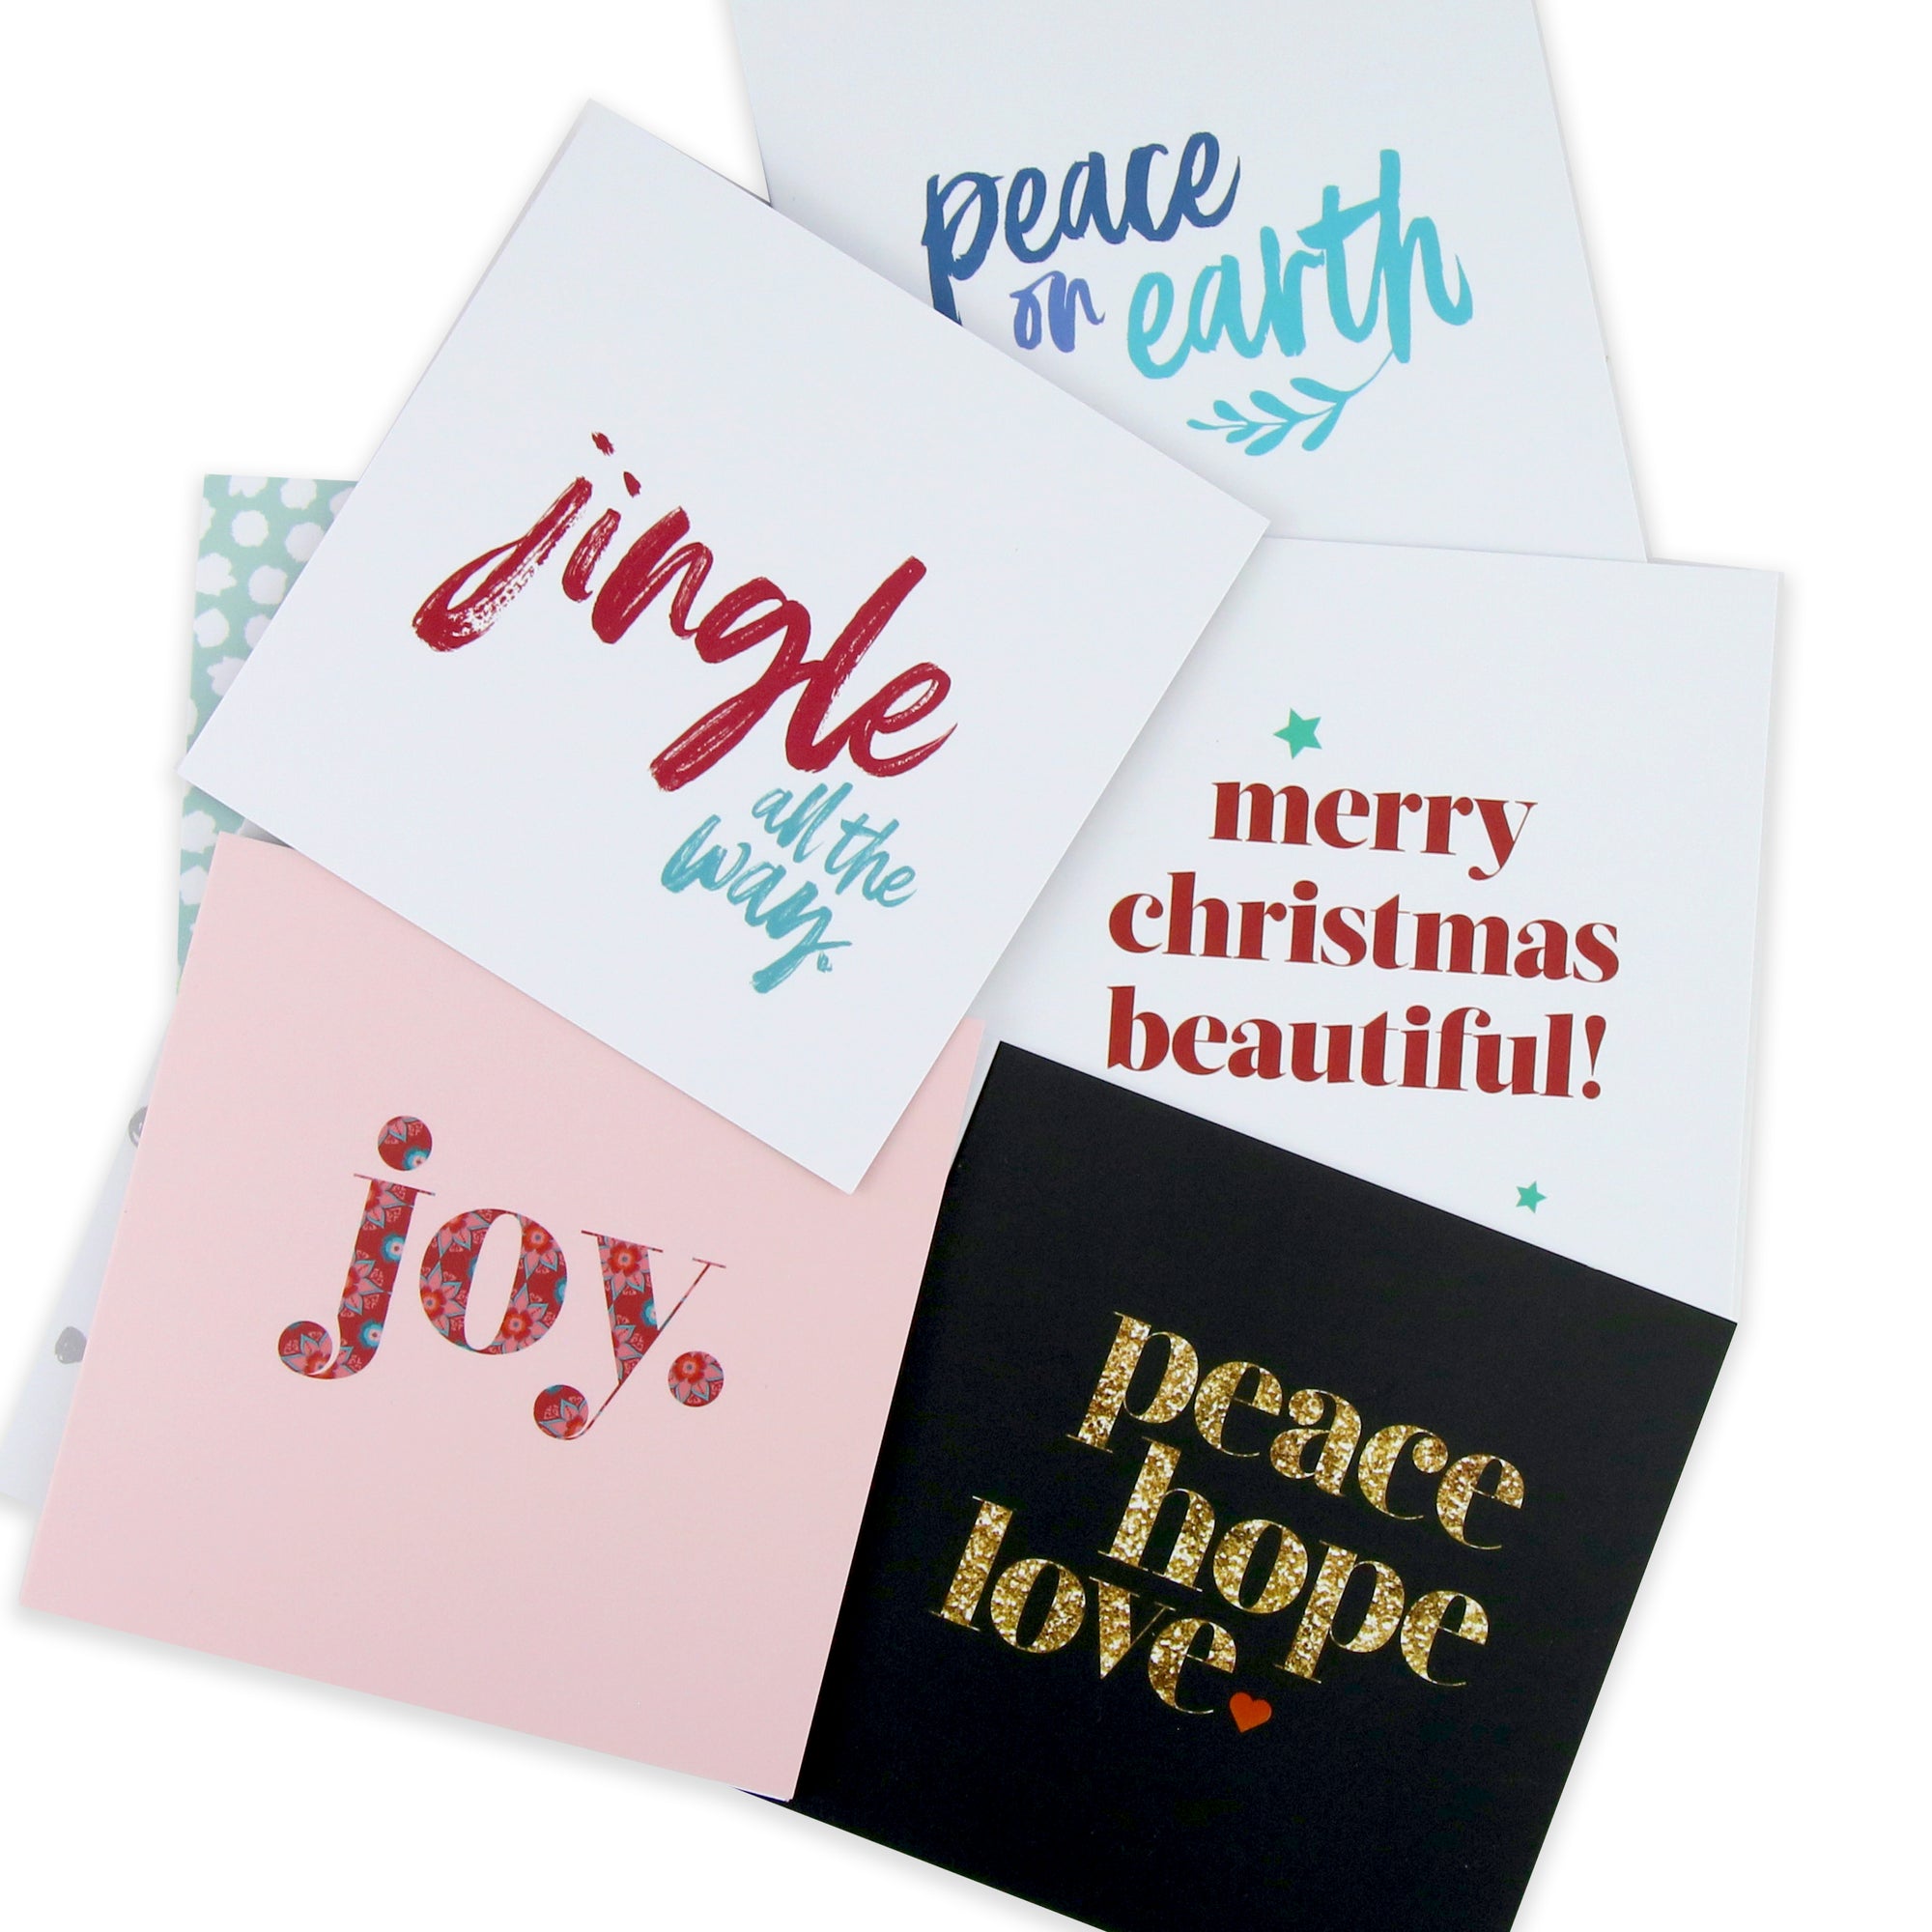 Christmas cards with meaningful words, pack of 5.